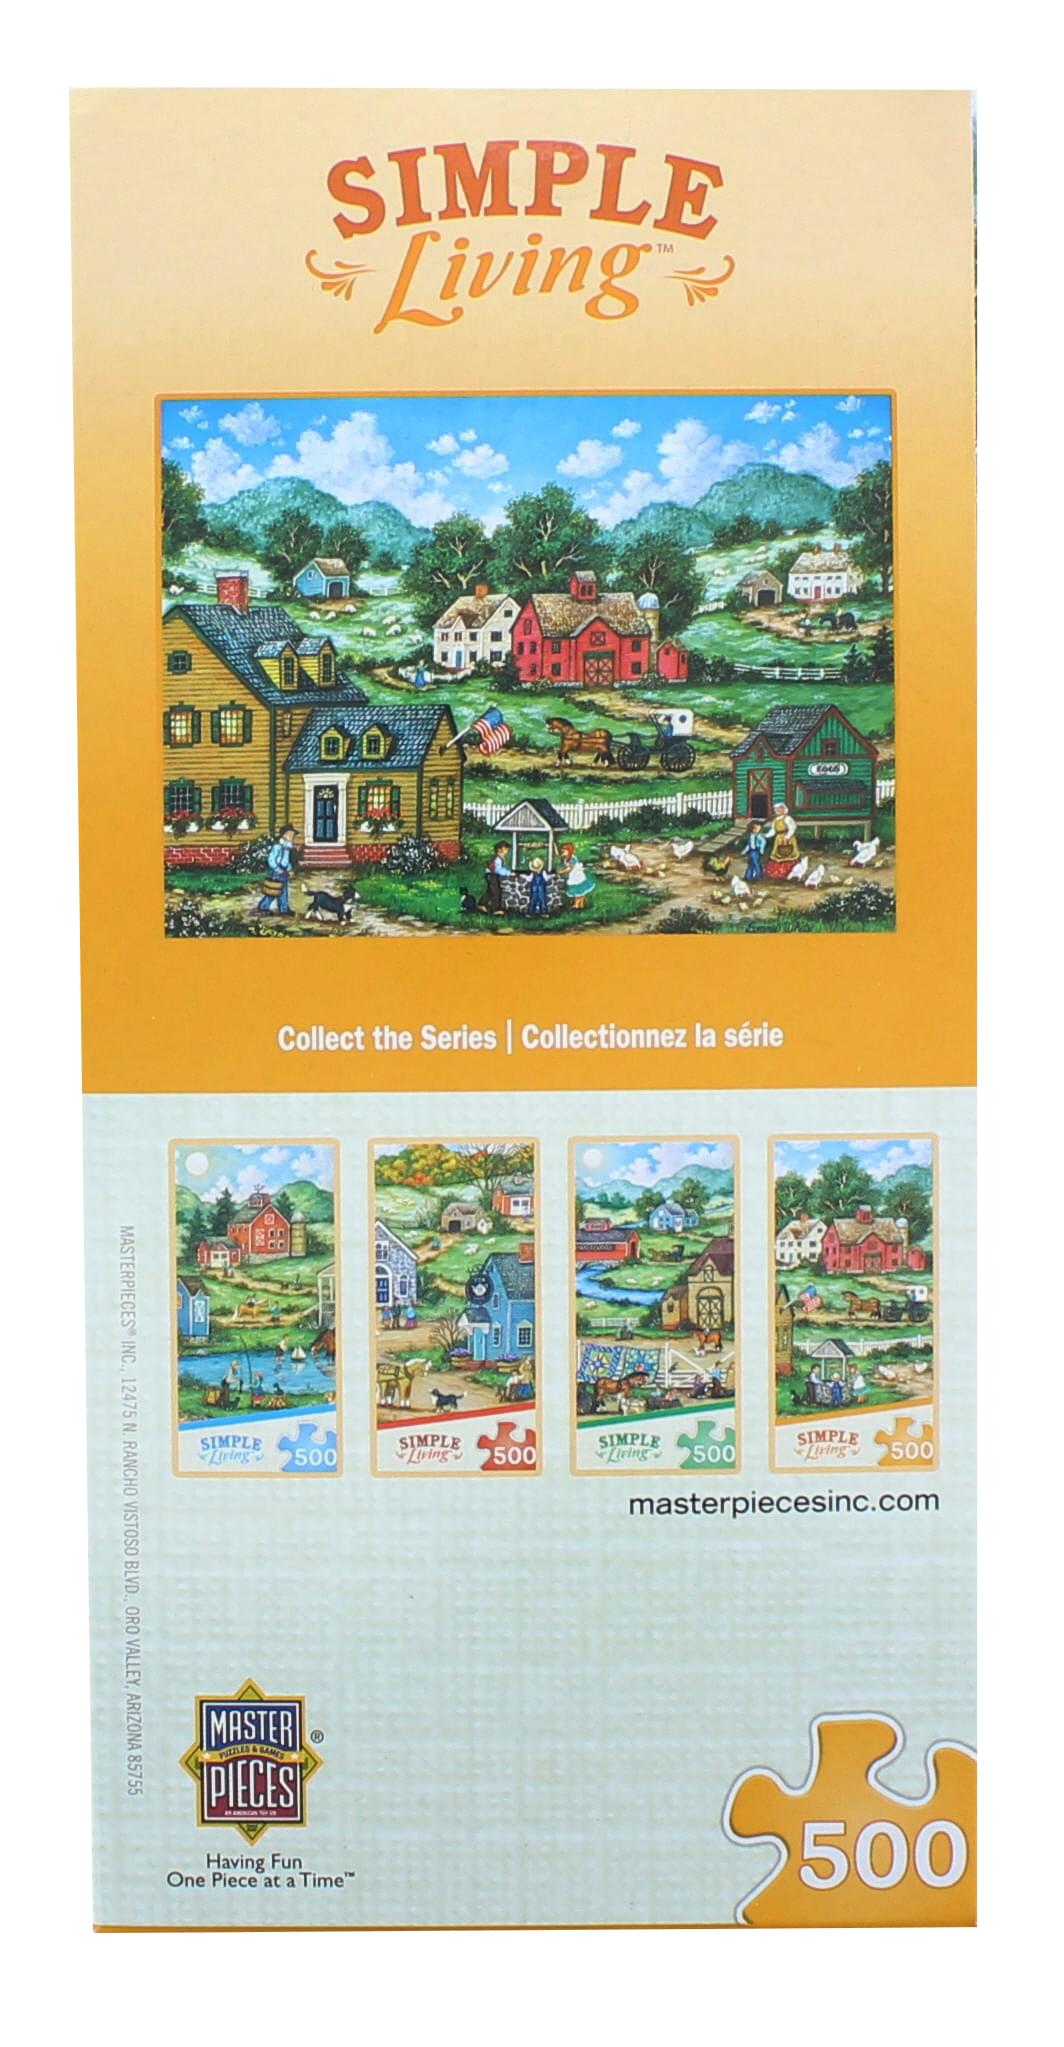 Simple Living 500 Piece Jigsaw Puzzle 4-Pack